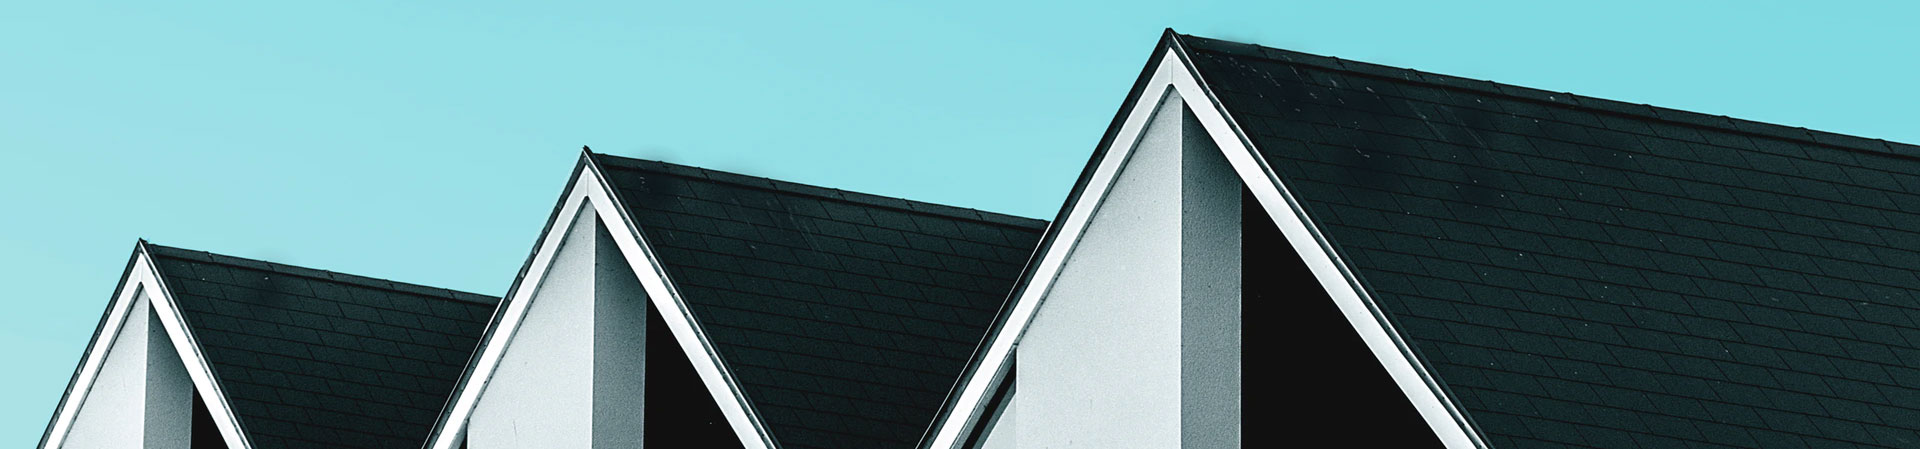 Pitched Roof replacements and repairs Sheffield | Bamfod Roofing